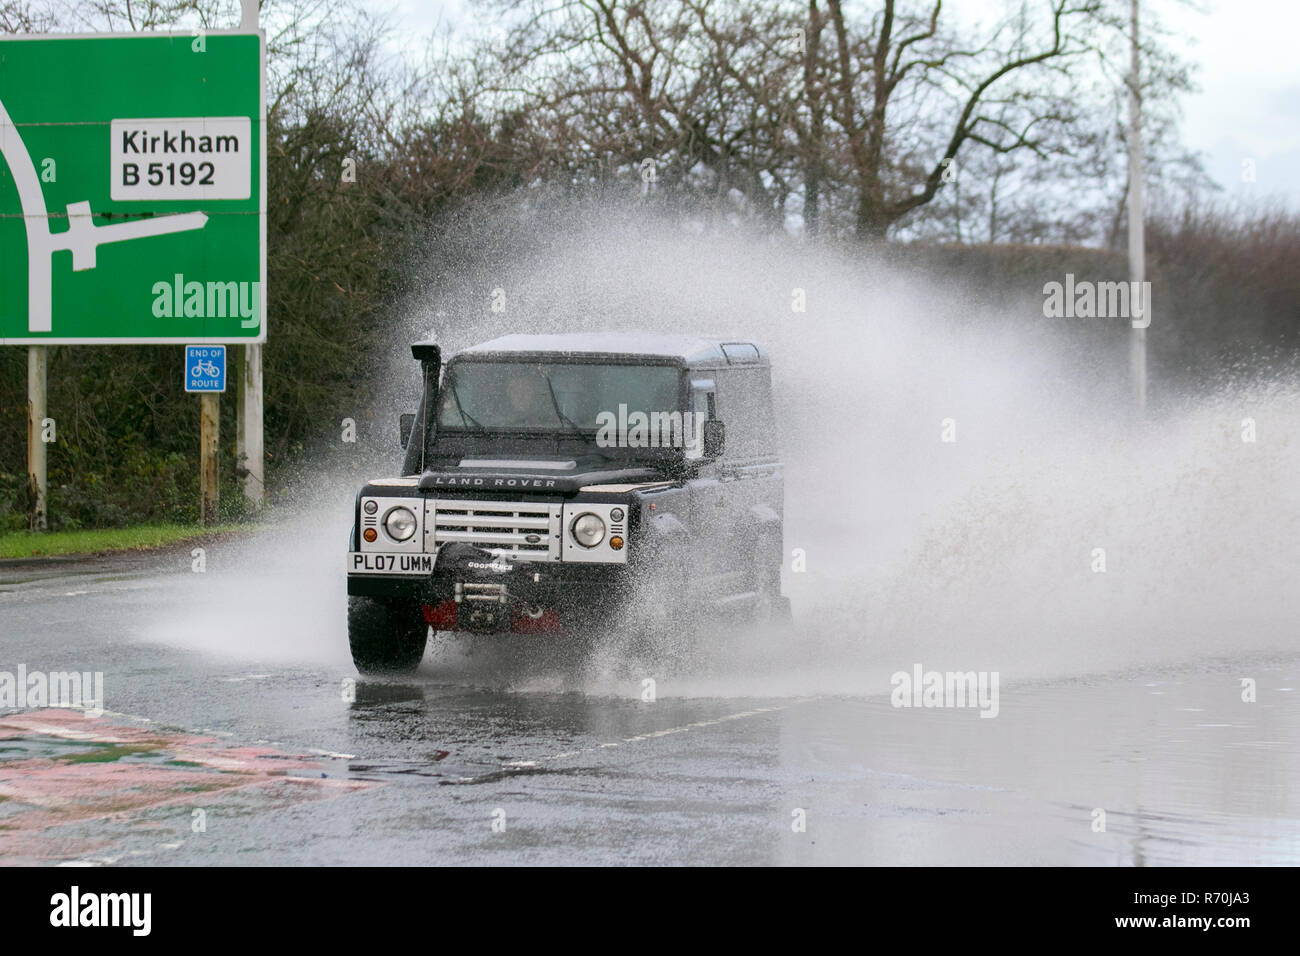 Preston, Lancashire. 7th Dec, 2018. UK Weather: Land Rover with snorkel exhaust,  on flooded roads after heavy overnight rain making for difficult and dangerous driving conditions. Stock Photo